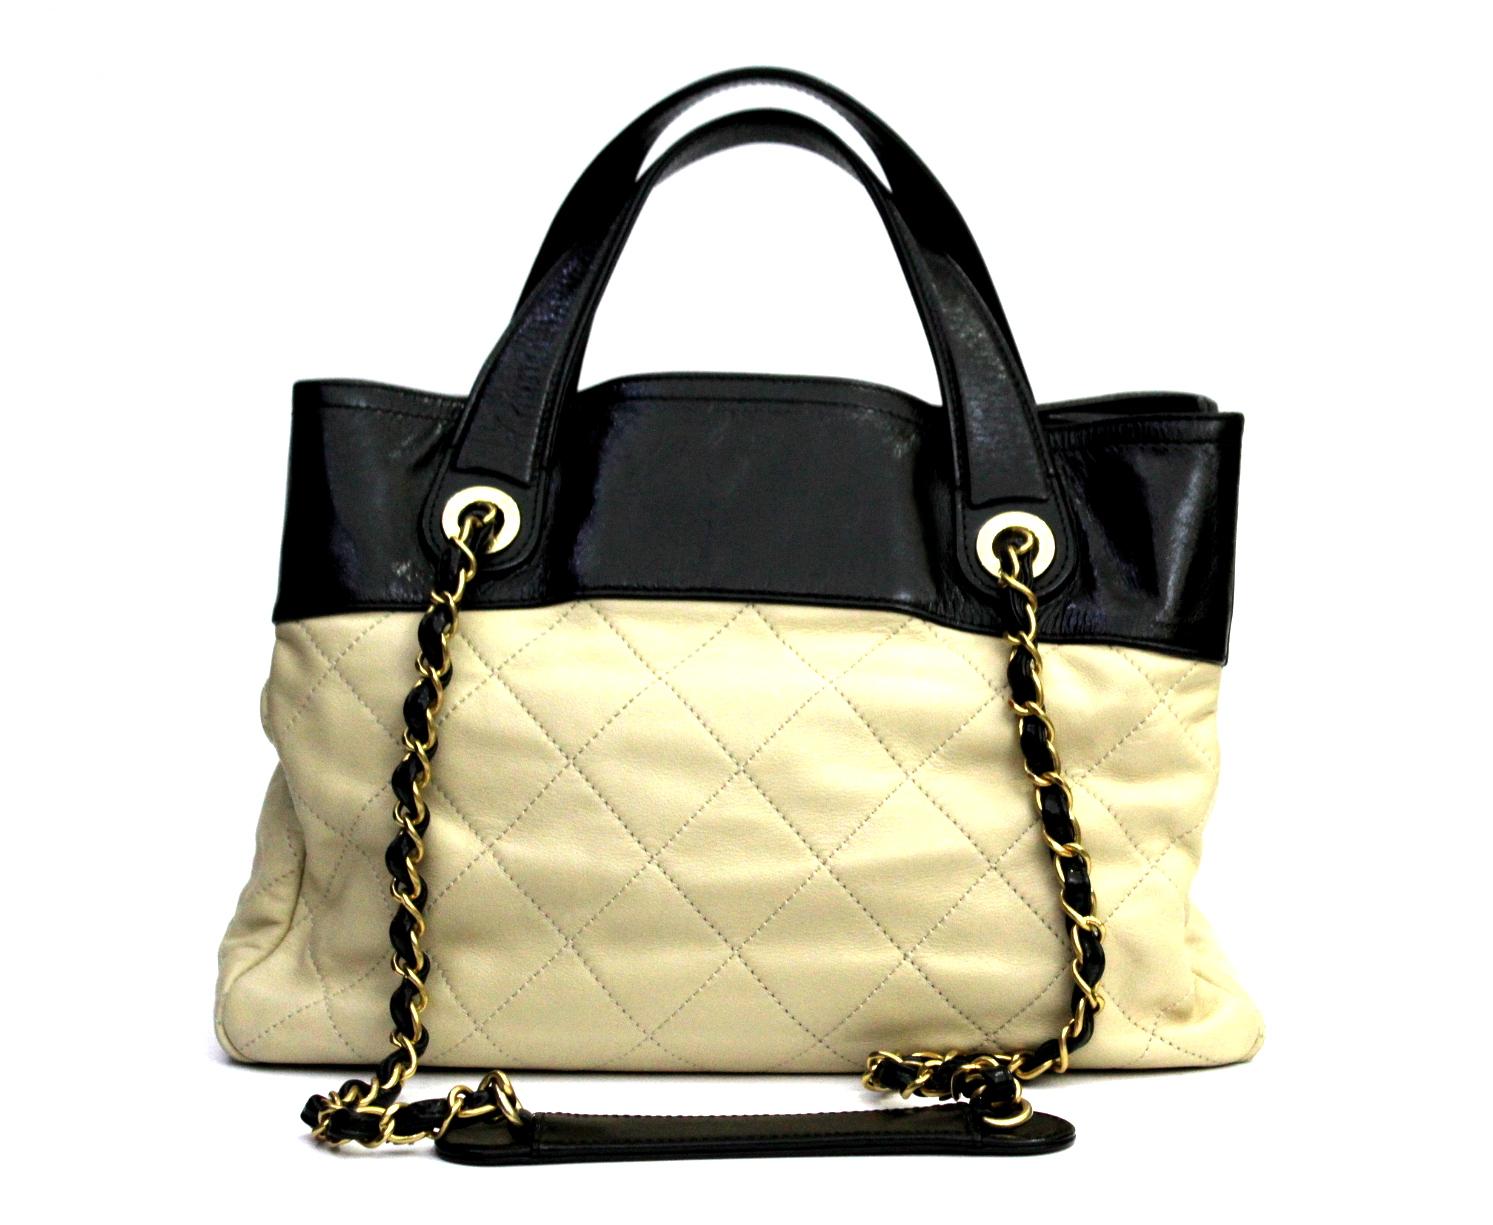 This designer vintage shoulder bag in quilted nude lambskin and black aged calfskin with CC logo lock at the front and gold tone hardware from 2012 Collection is perfect for a casual wear. It has a roomy interior with two open compartments, one